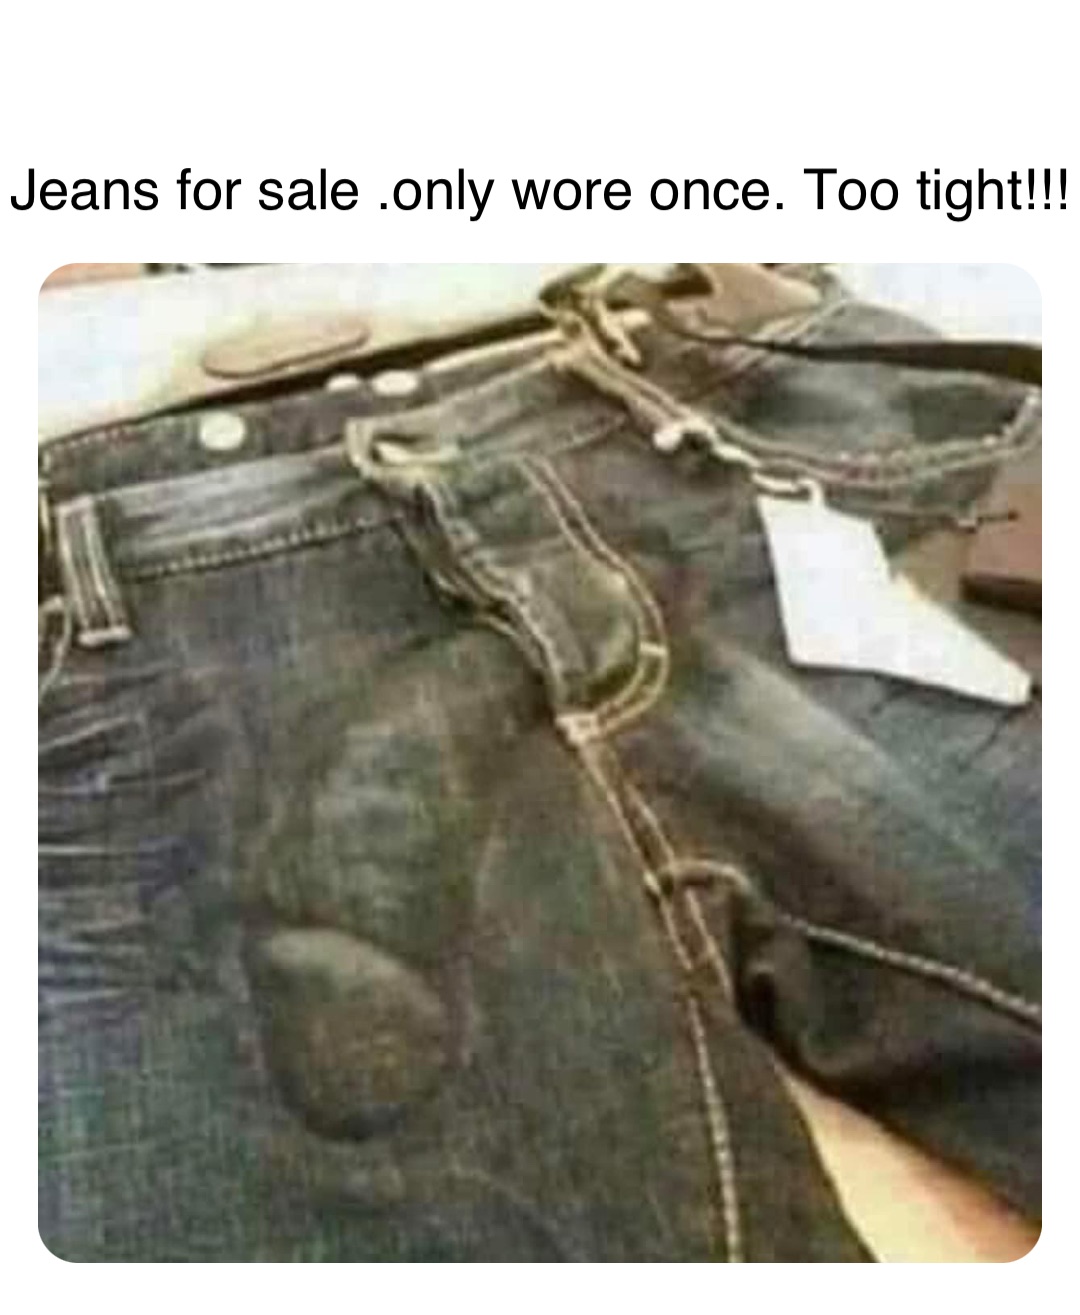 Double tap to edit Jeans for sale .only wore once. Too tight!!!